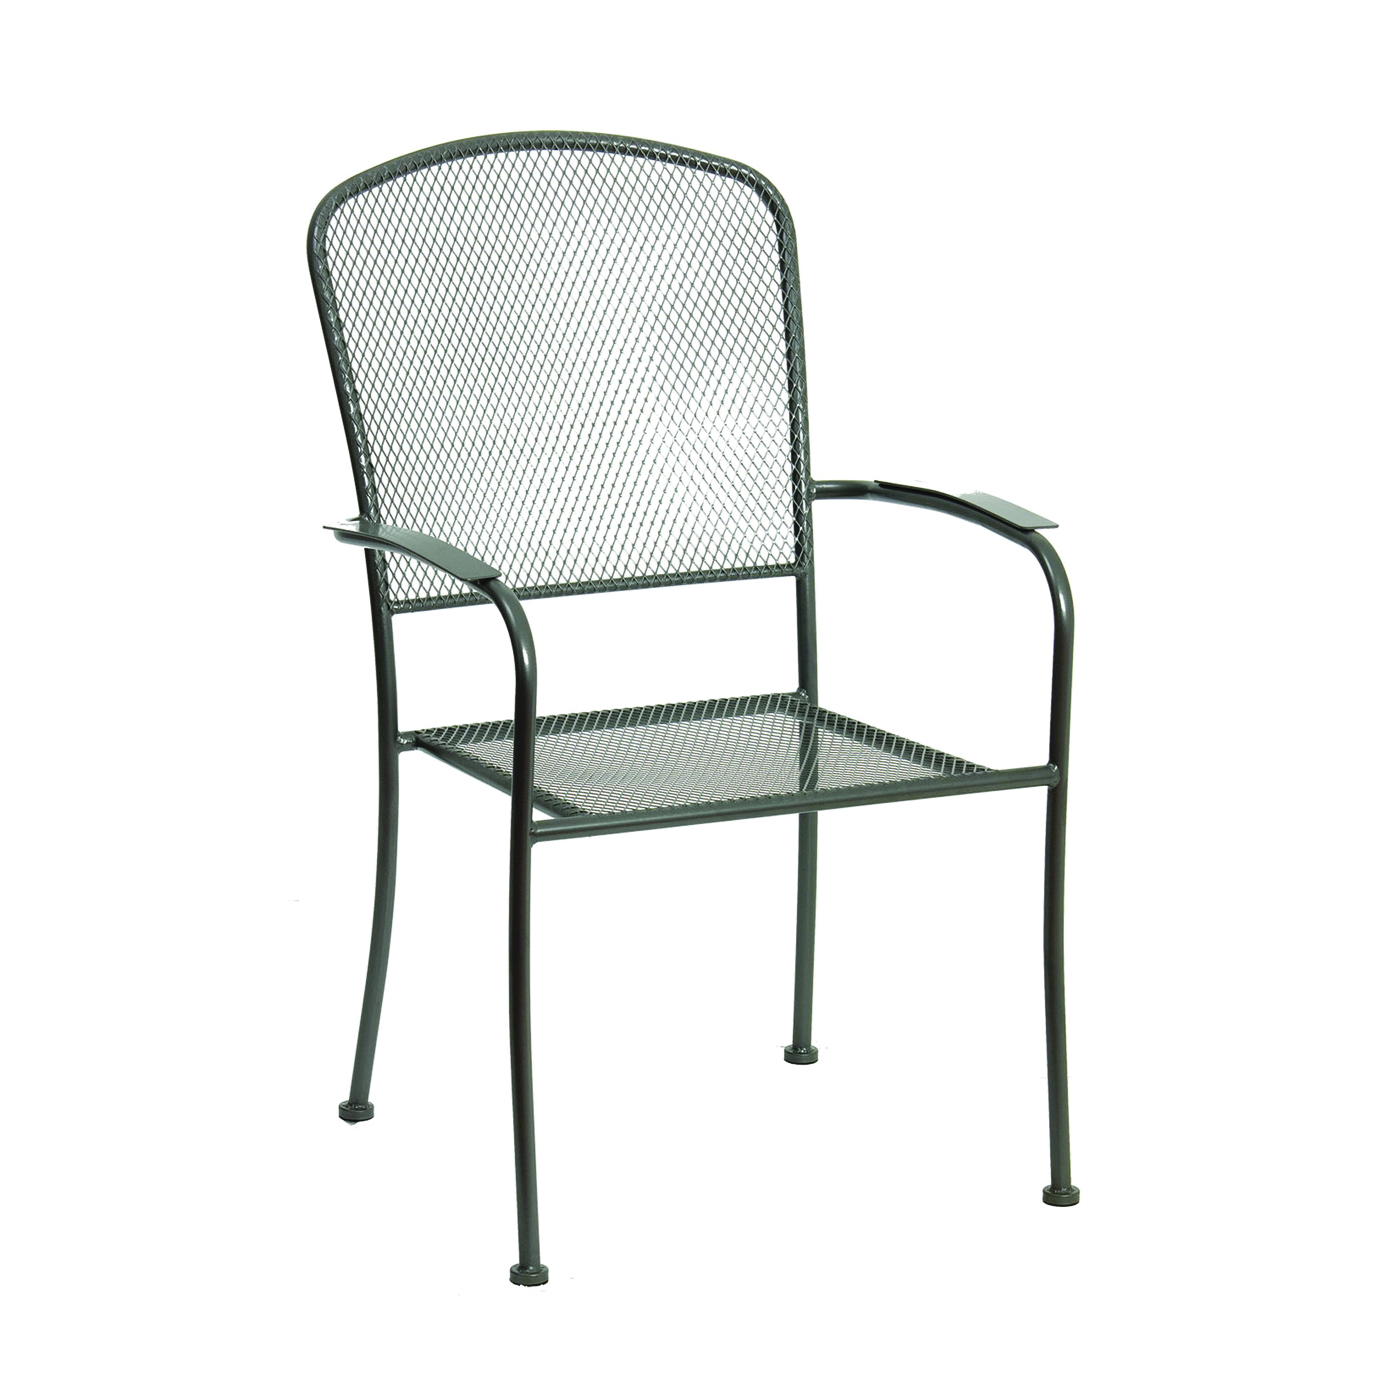 Arlington JYL-2077C Stackable Patio Chair with Mesh, 24 in W, 24-1/2 in D, 36-5/8 in H, Steel Seat